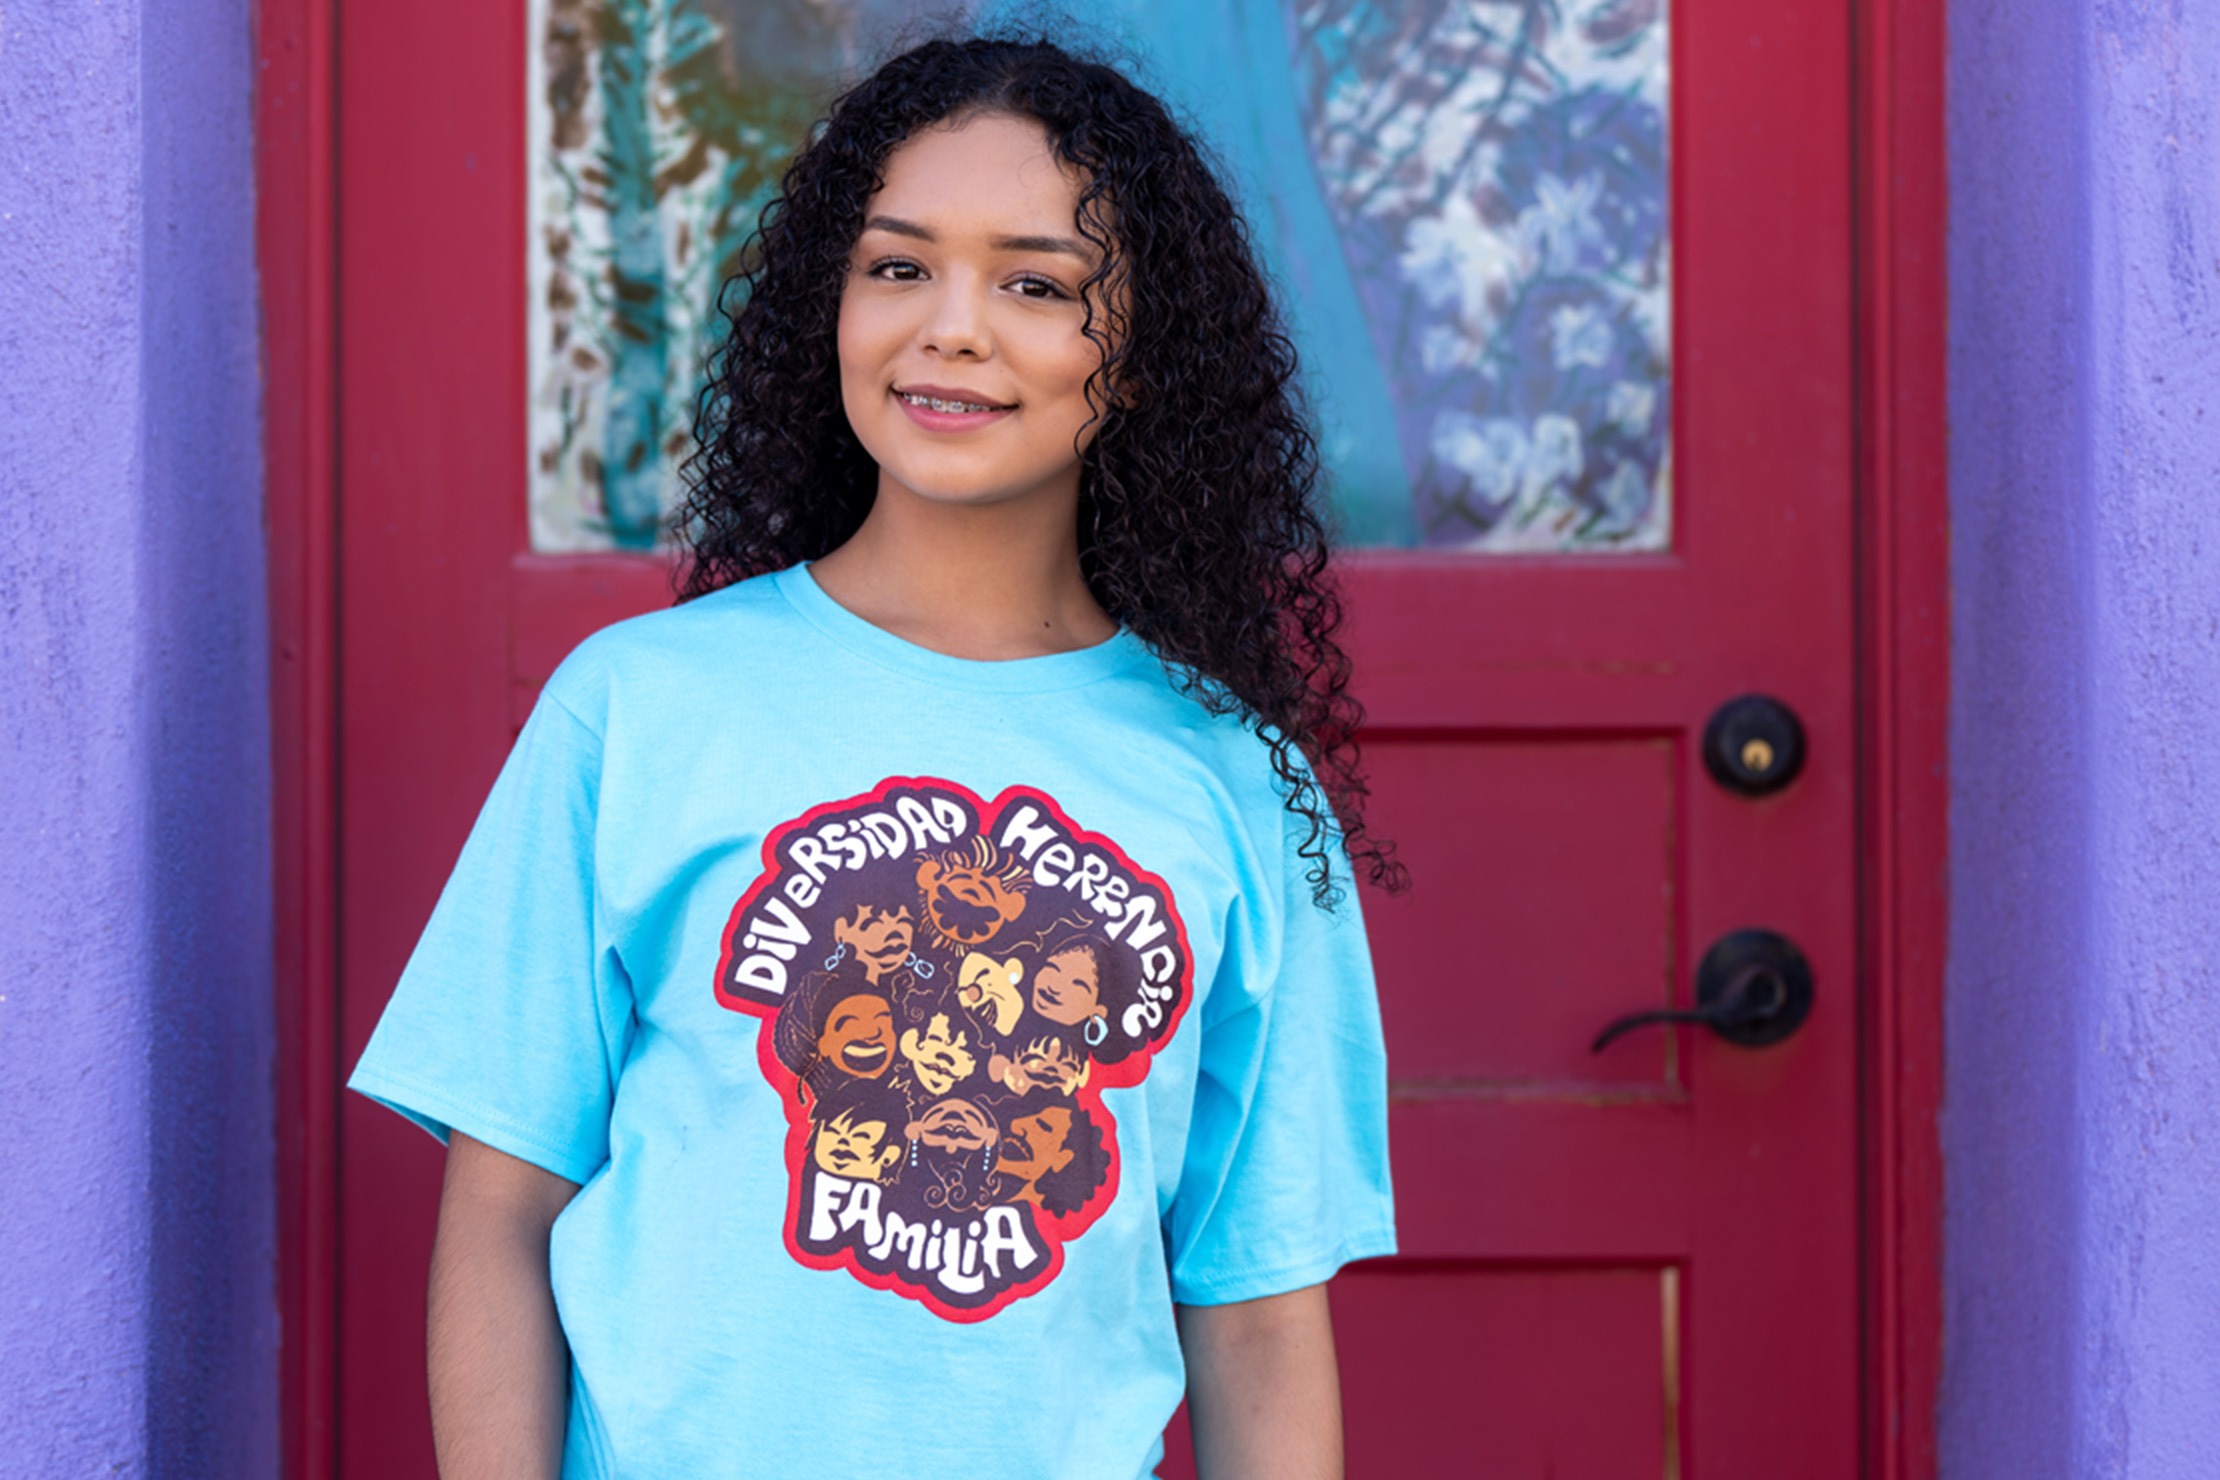 Woman wearing Hispanic Heritage clothing outside of a red door